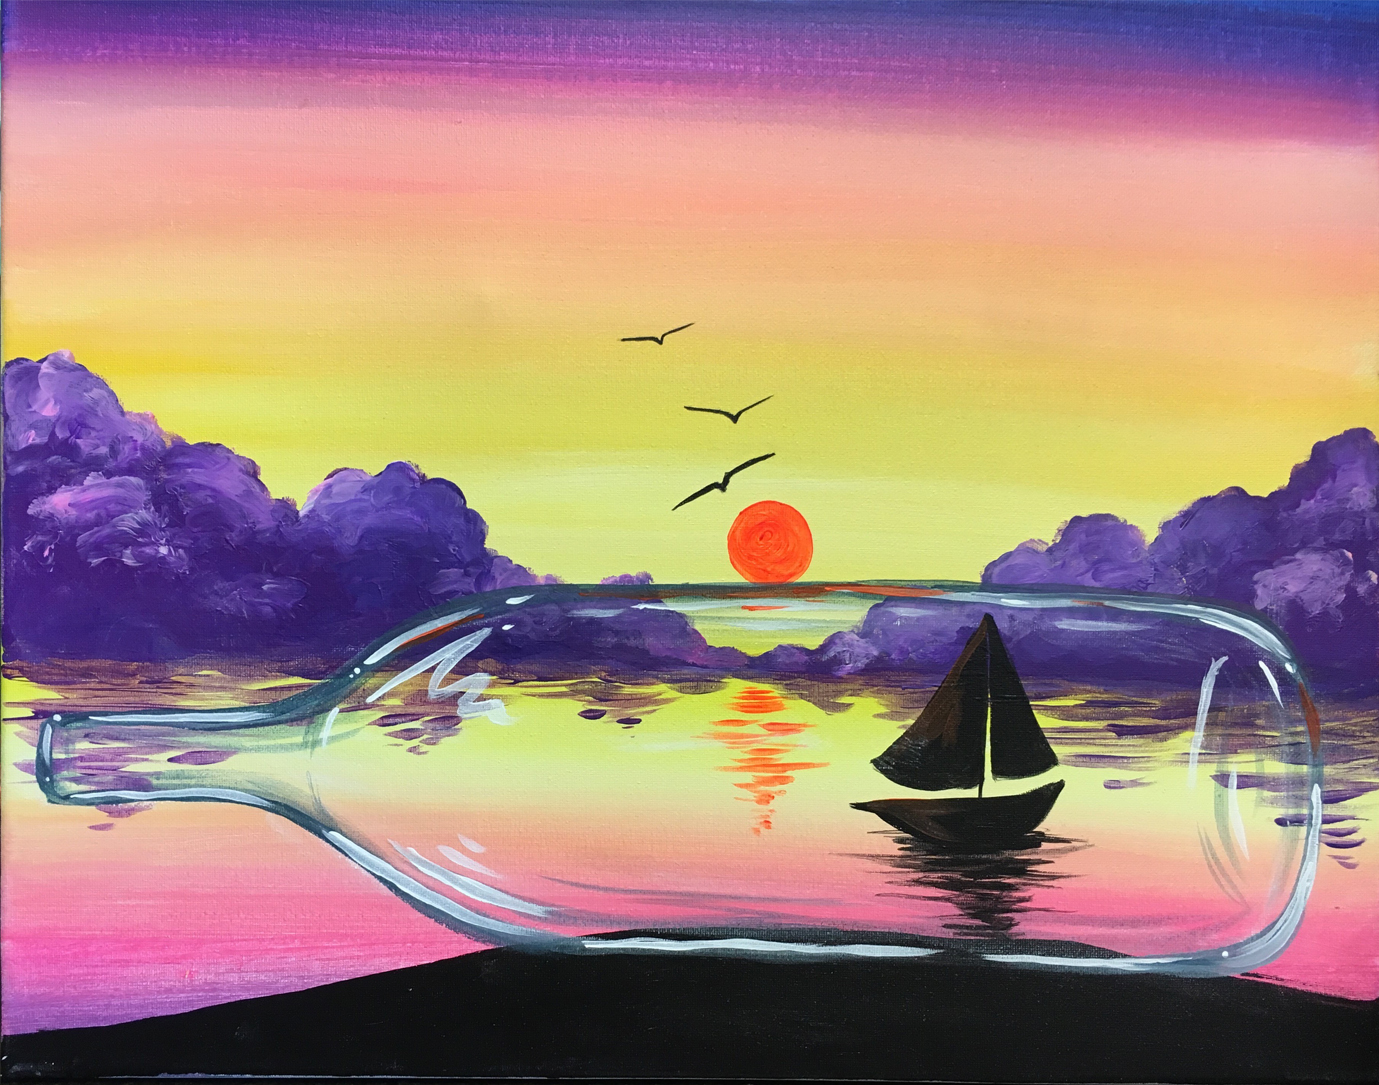 Ship in a Bottle - Pinot's Palette Painting